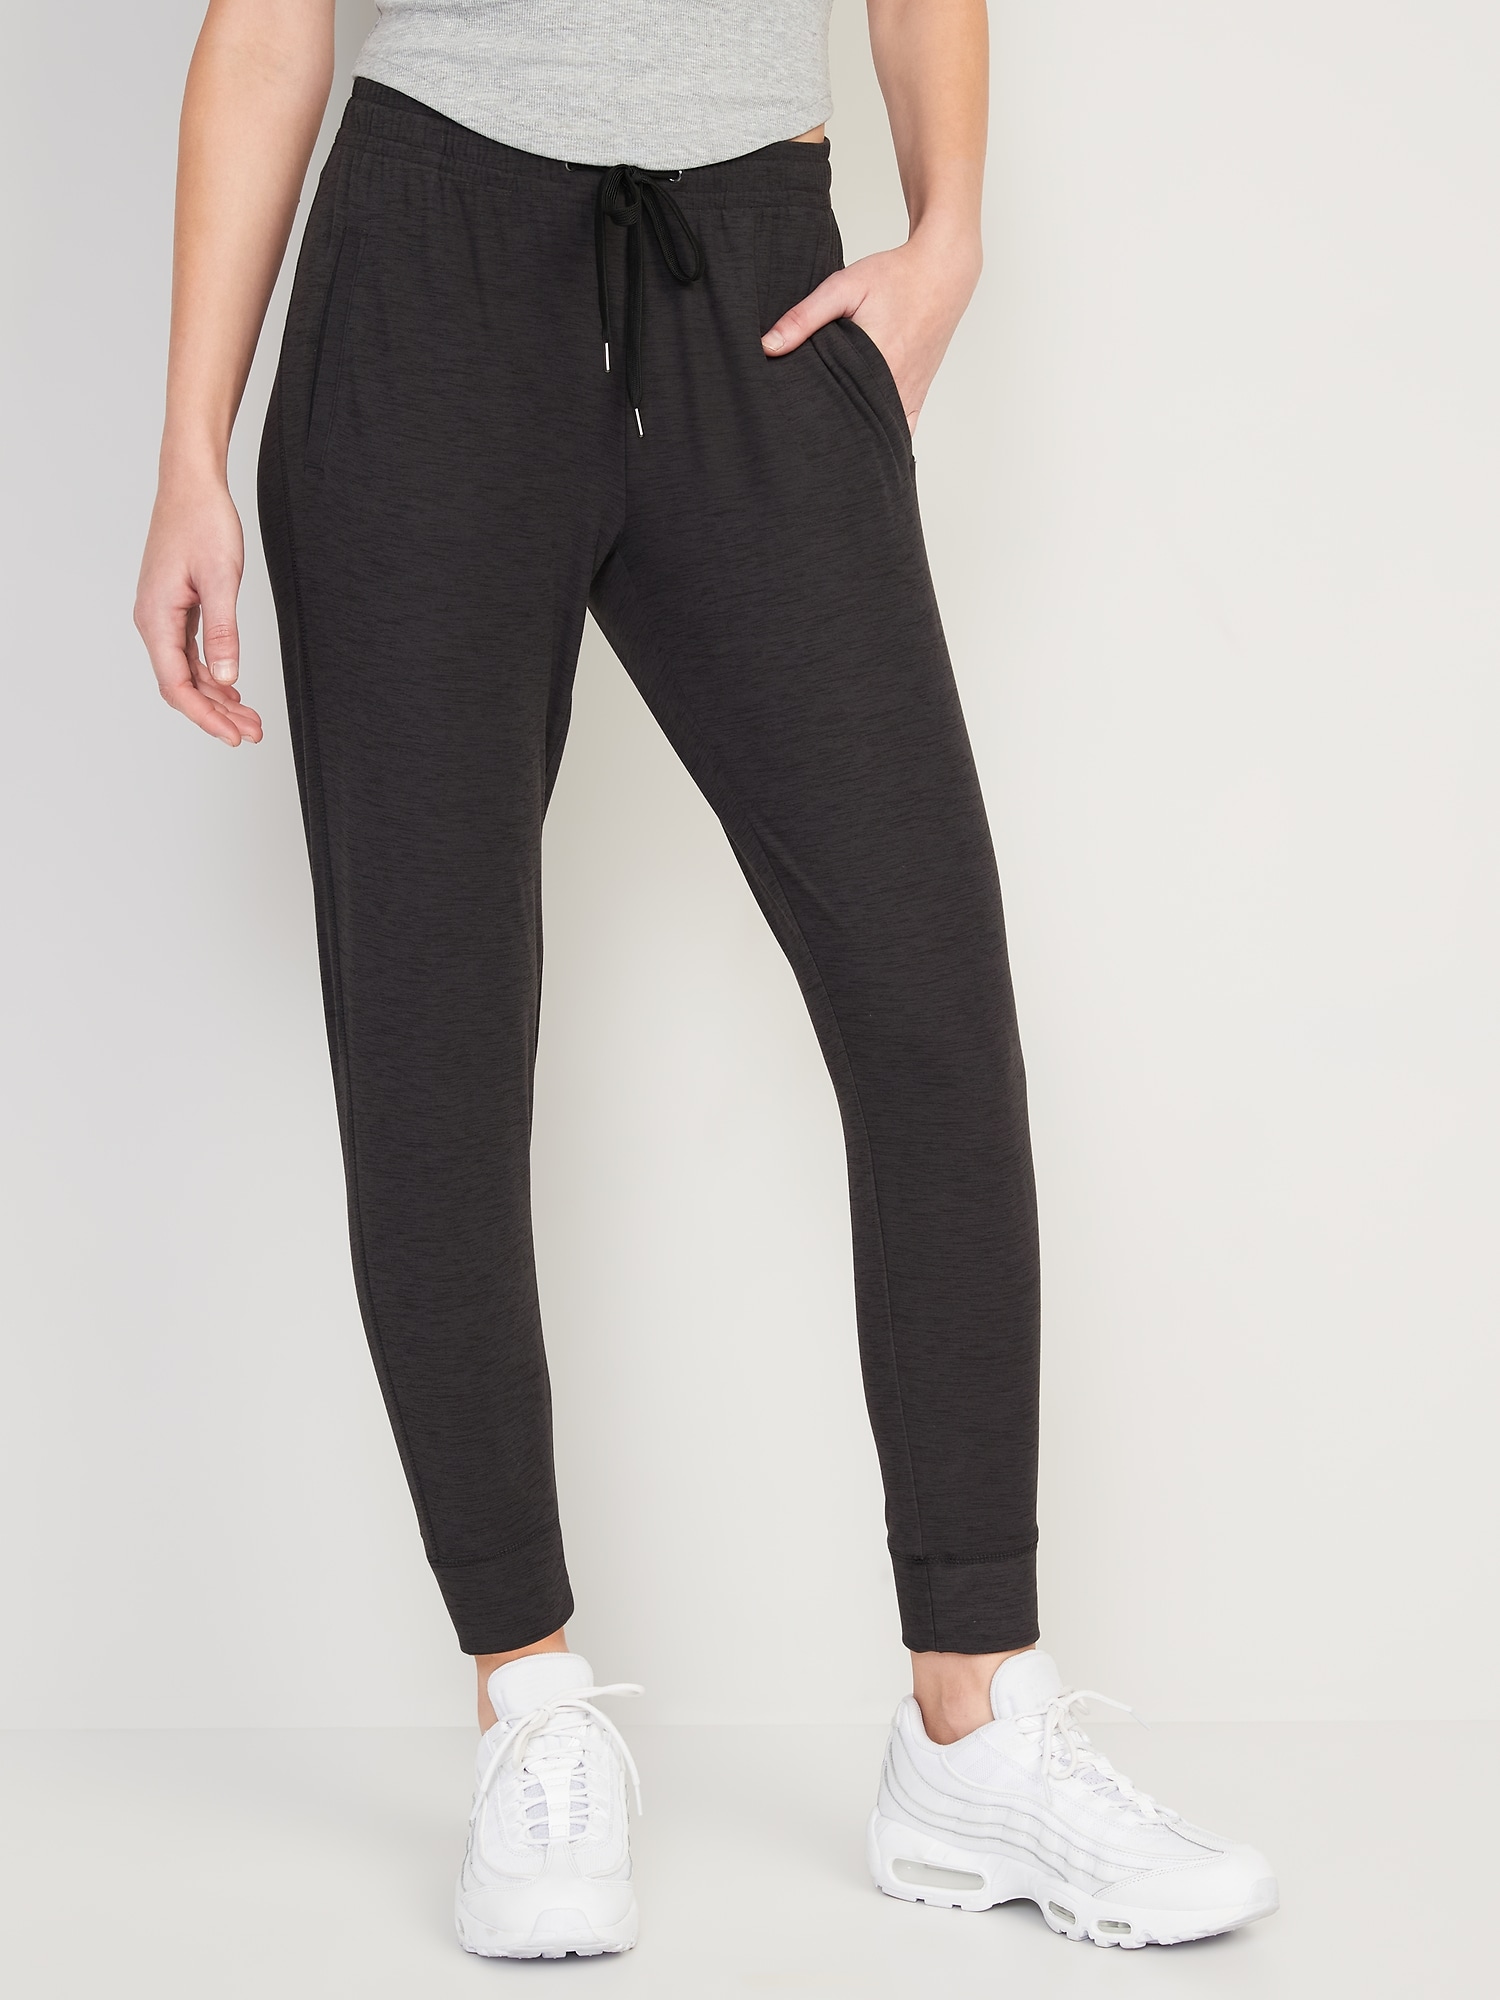 Navy Joggers For Women